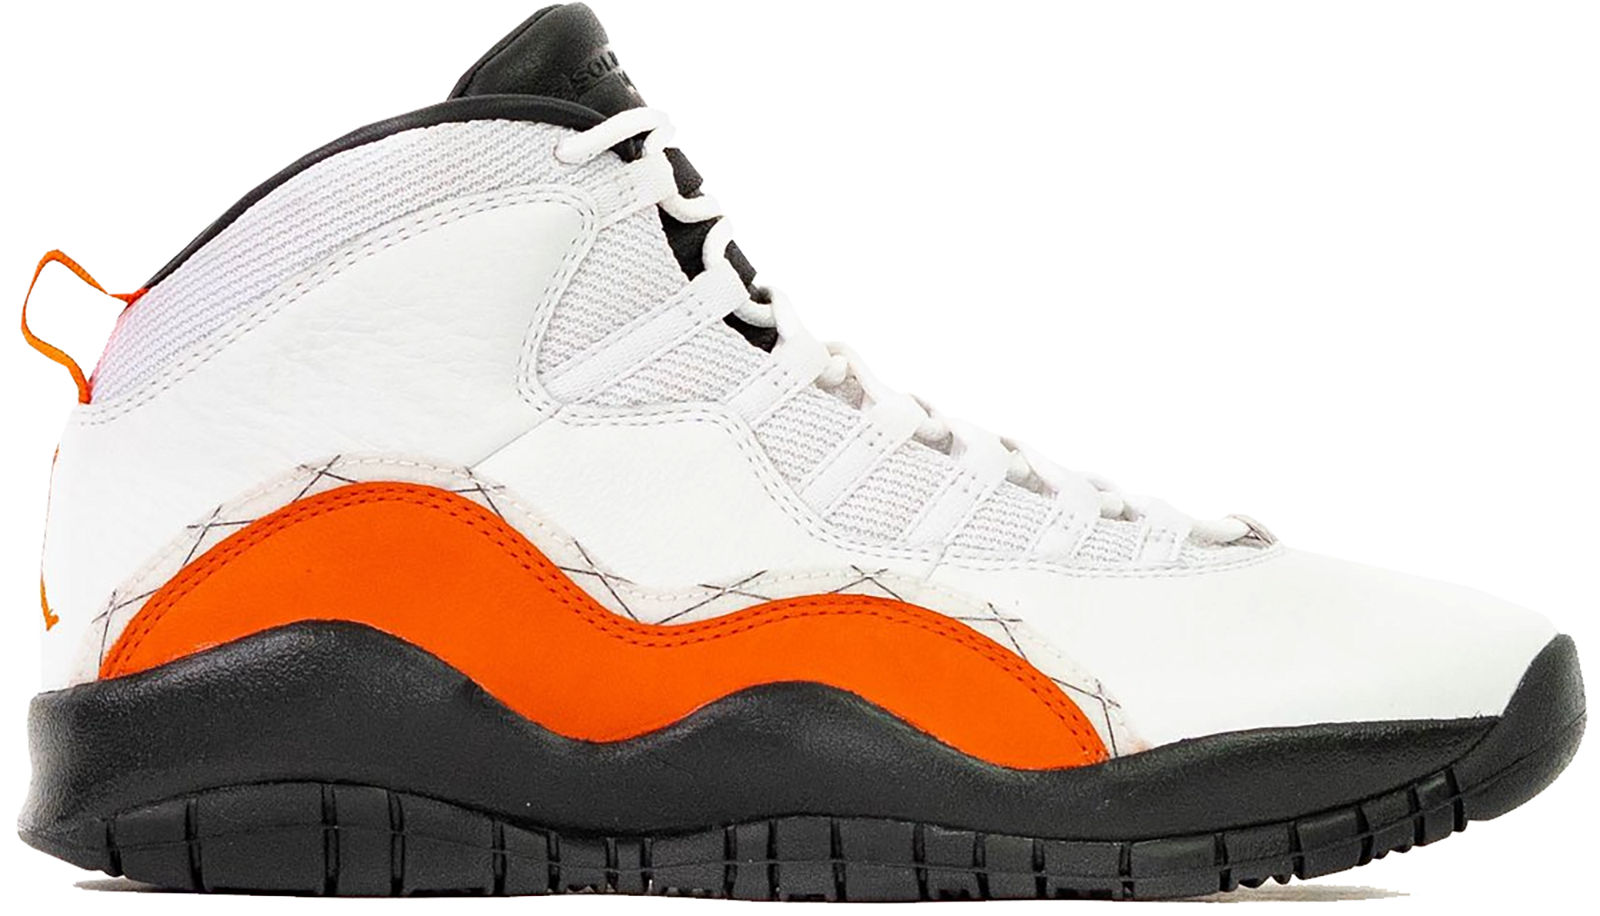 Jordan 10 Retro SoleFly (Friends and Family) sneaker informations